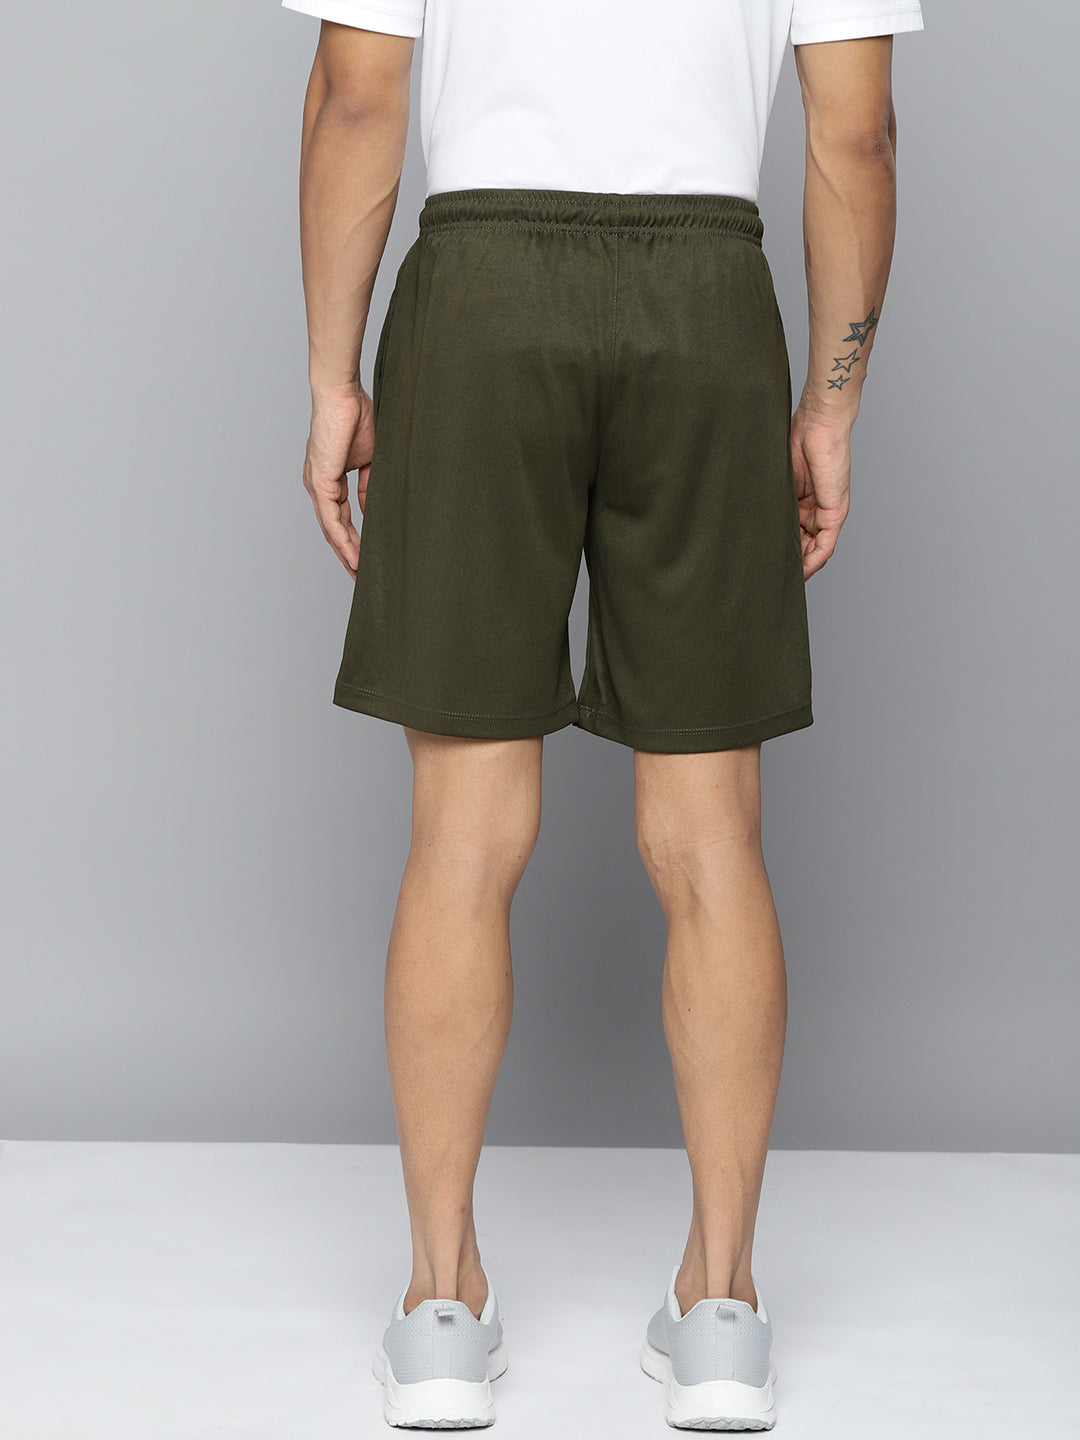 Alcis Men Olive Green Solid Slim Fit Running Sports Shorts